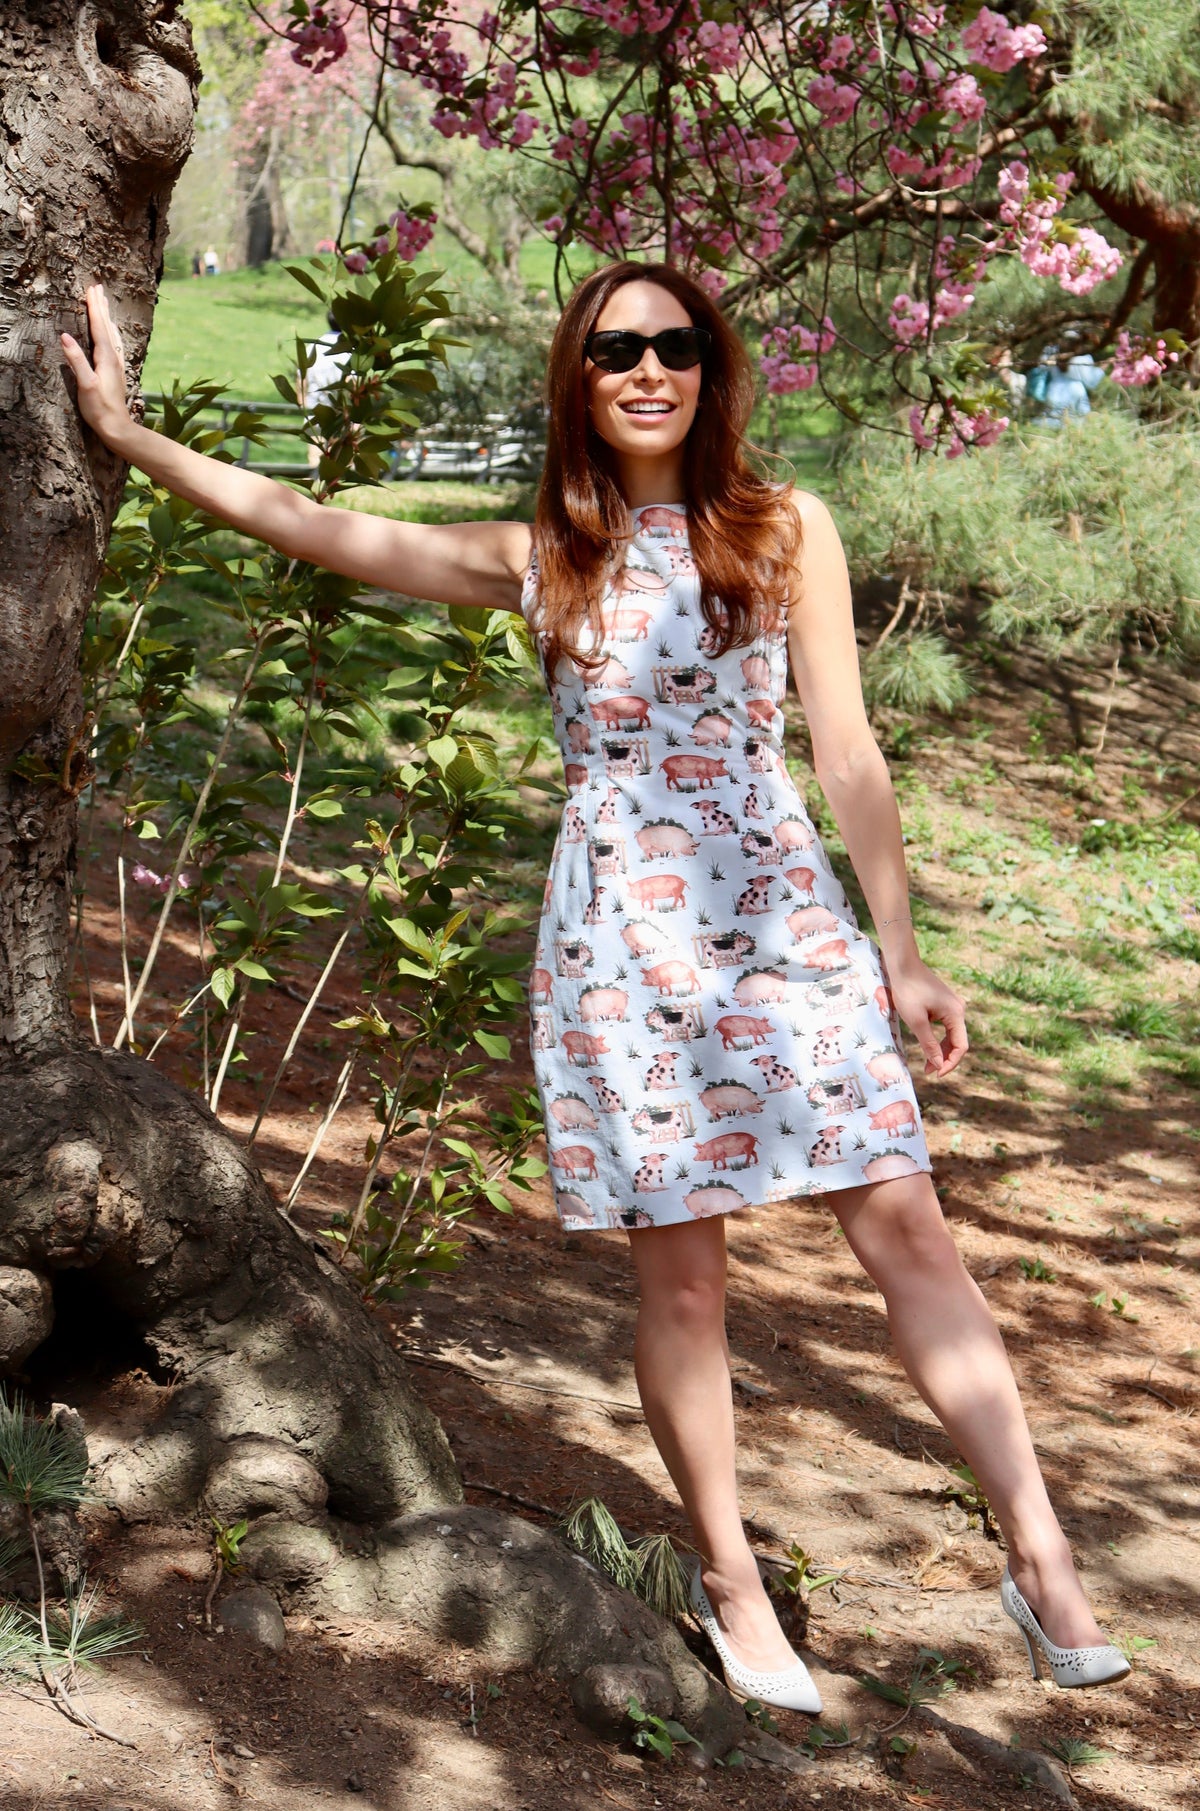 Model wearing short pig print dress leaning against a tree.